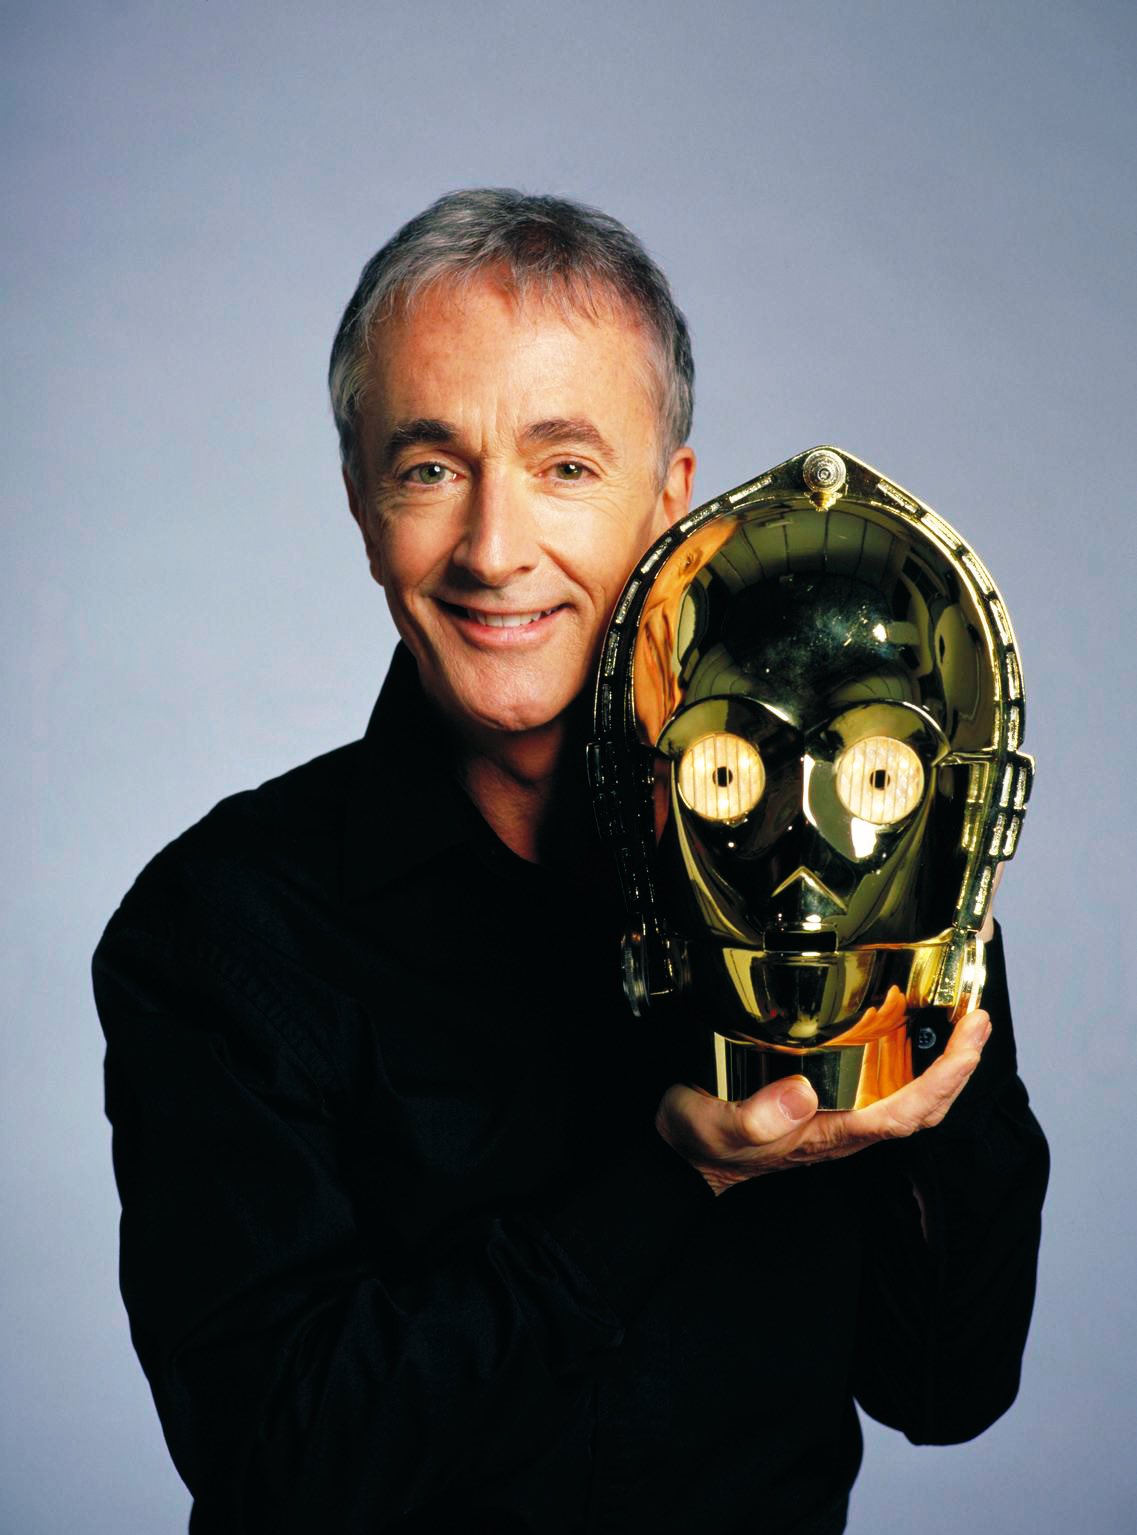 Happy birthday to Anthony Daniels! Thank you for bringing this wonderful character to life  